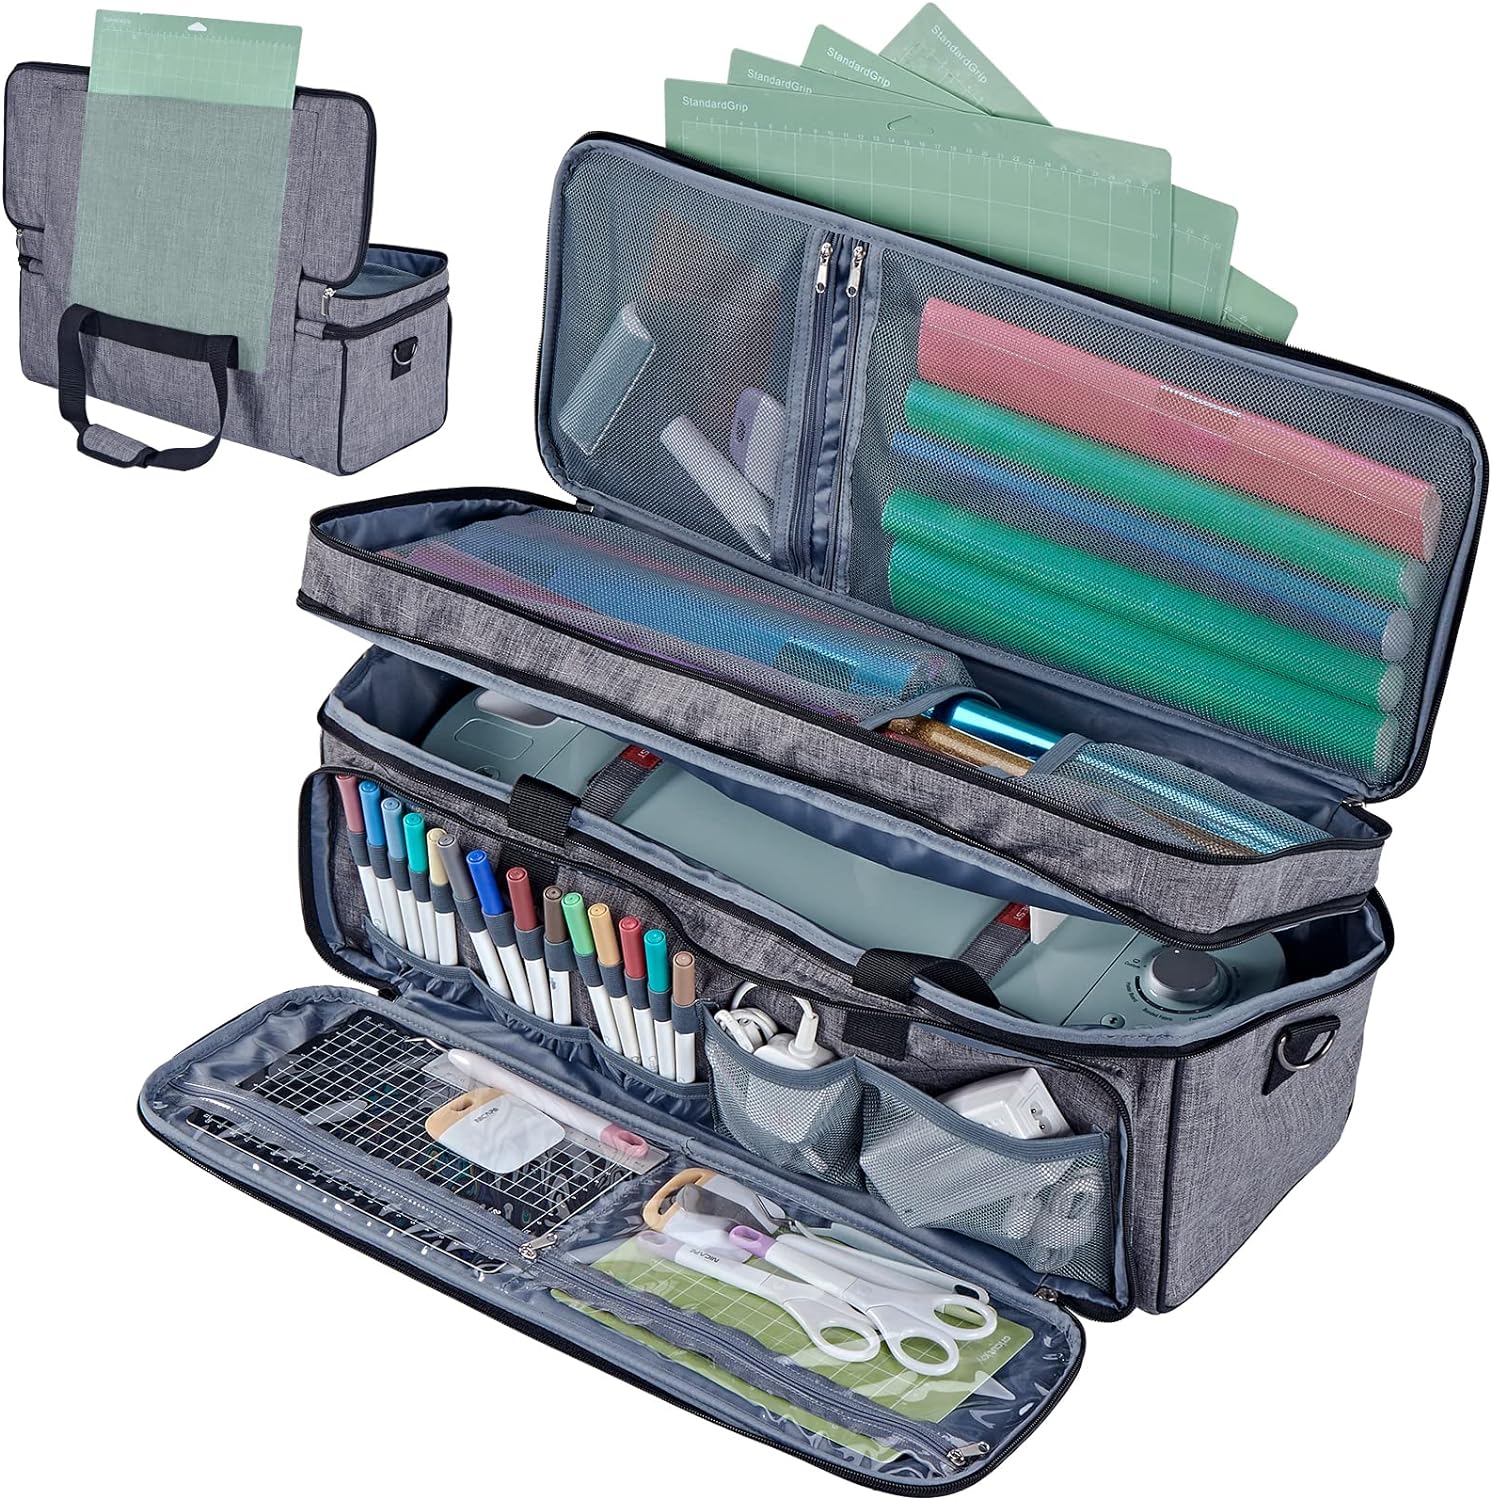 HOMEST Double Layer Carrying Case with Mat Pocket for Cricut Explore Air 2, Cricut Maker, Grey